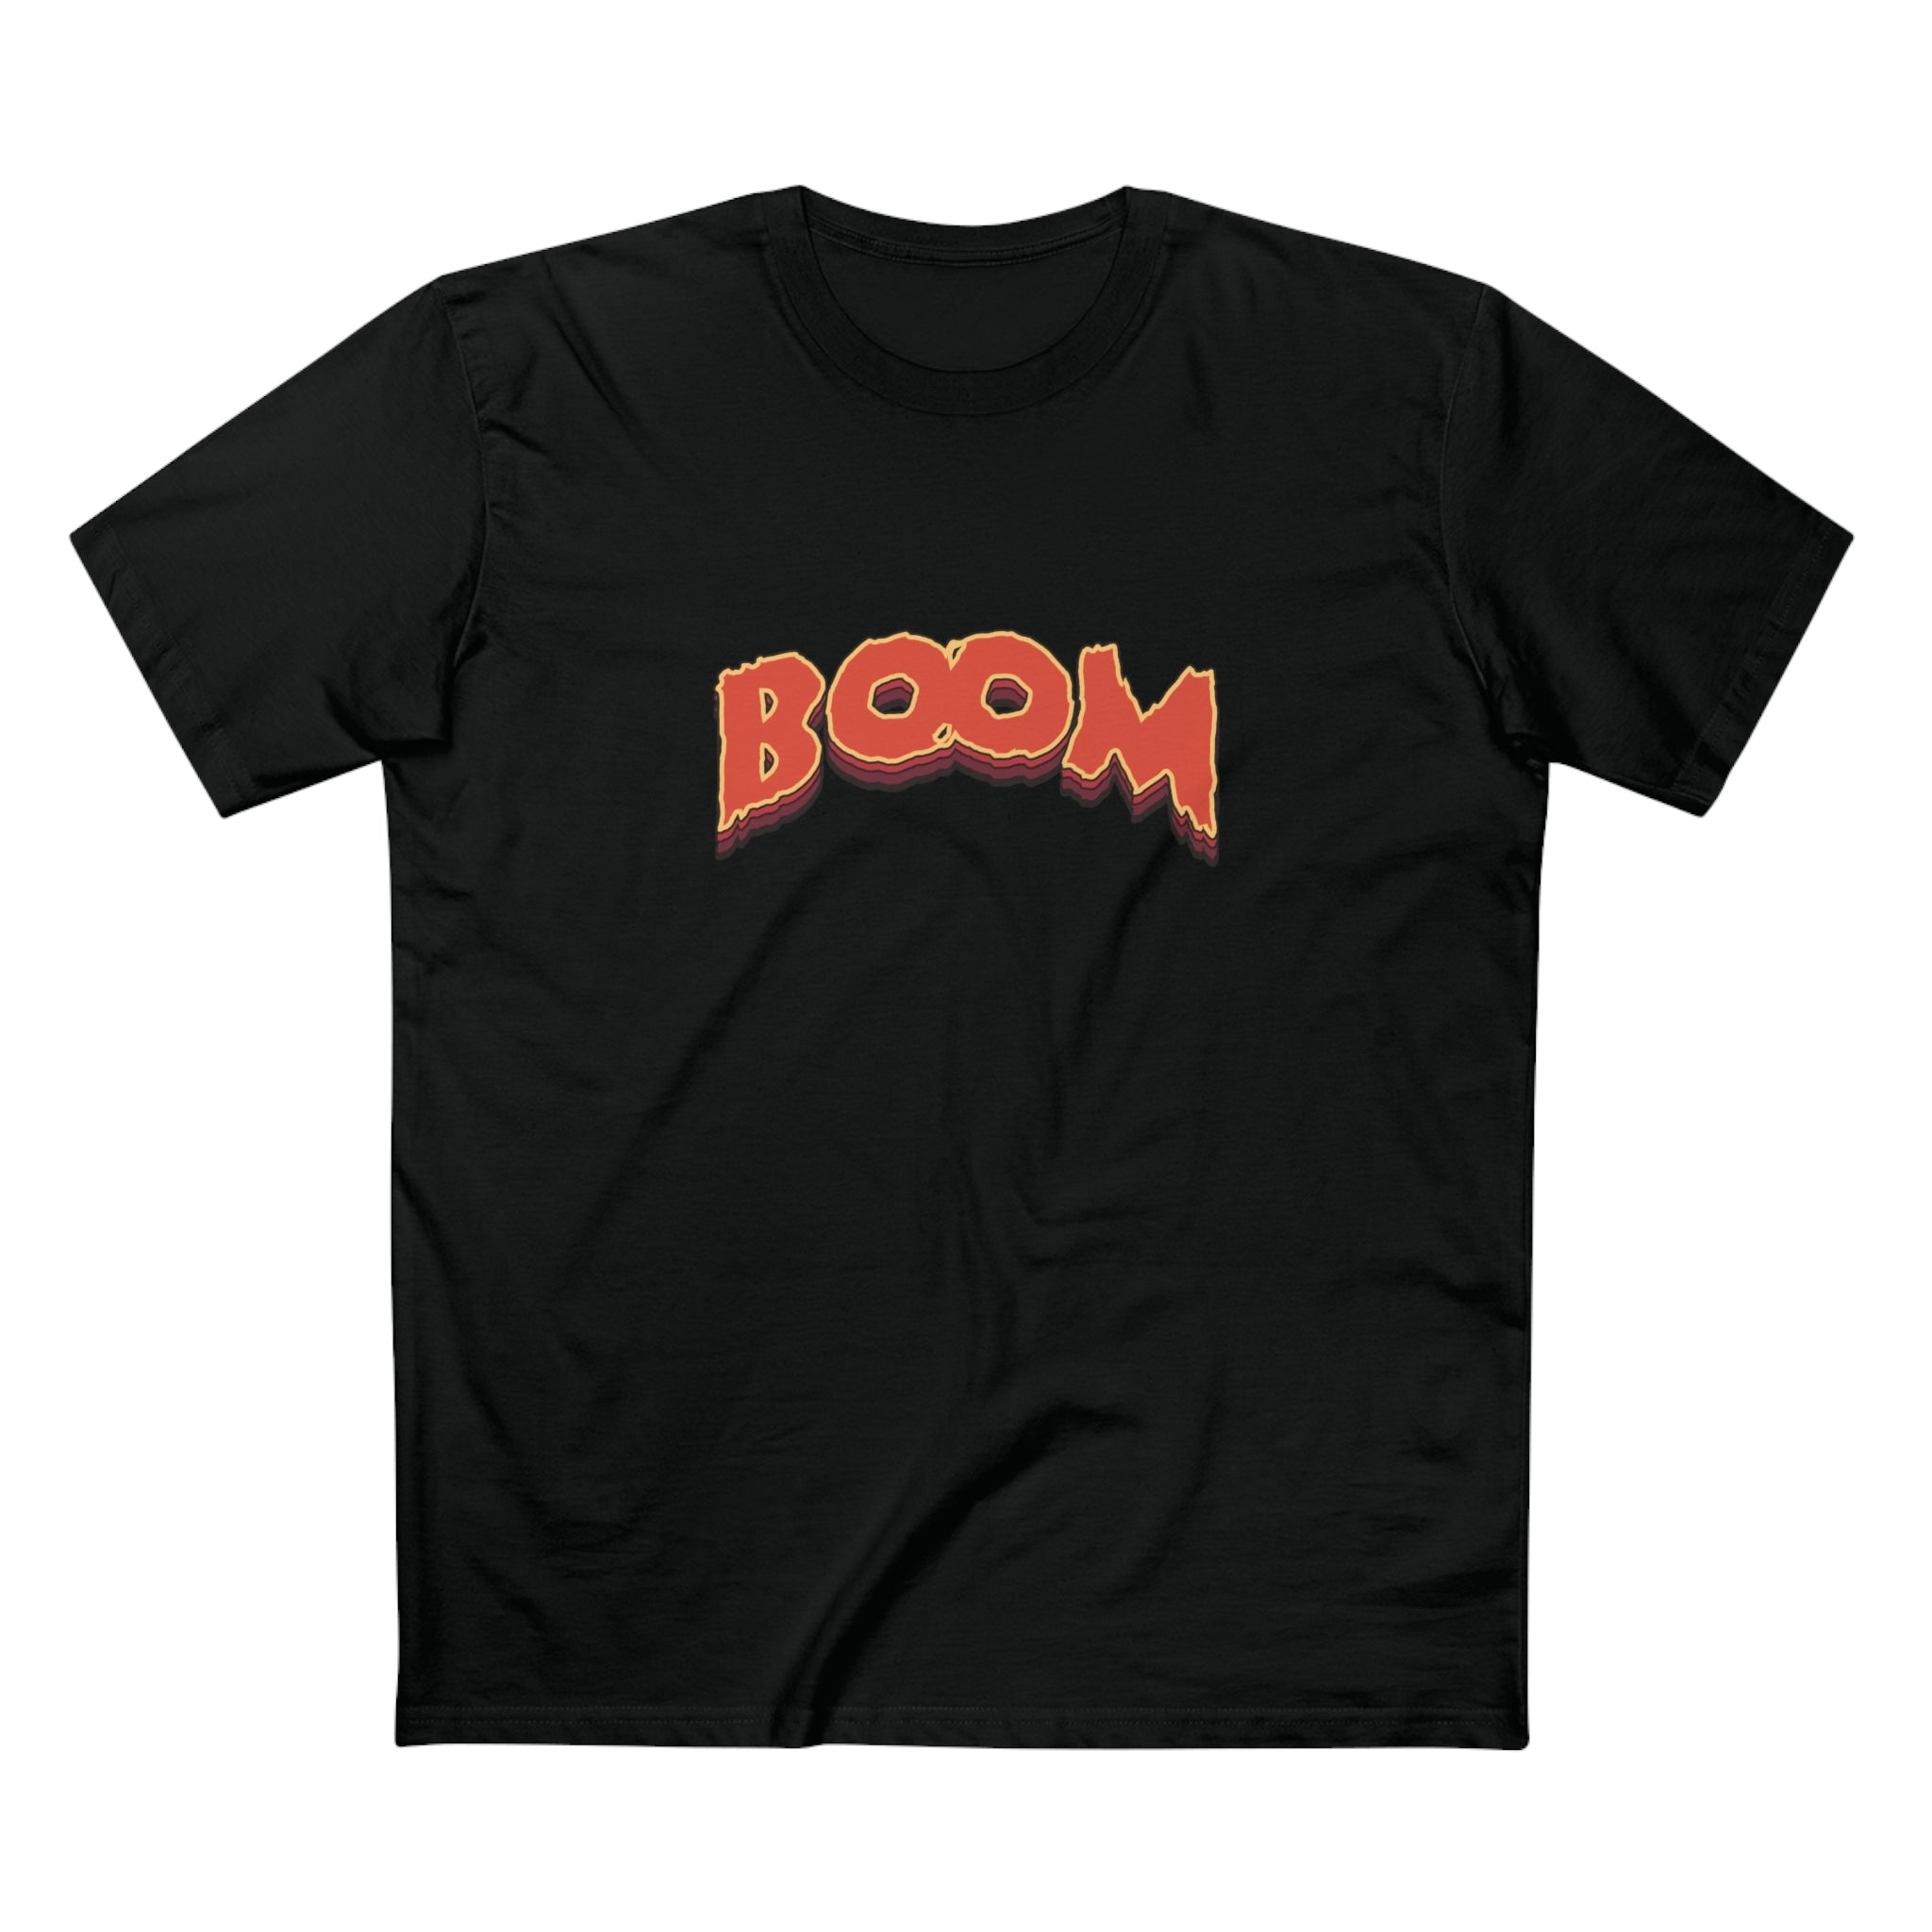 adult black graphic tee, black t shirt with red BOOM logo on front